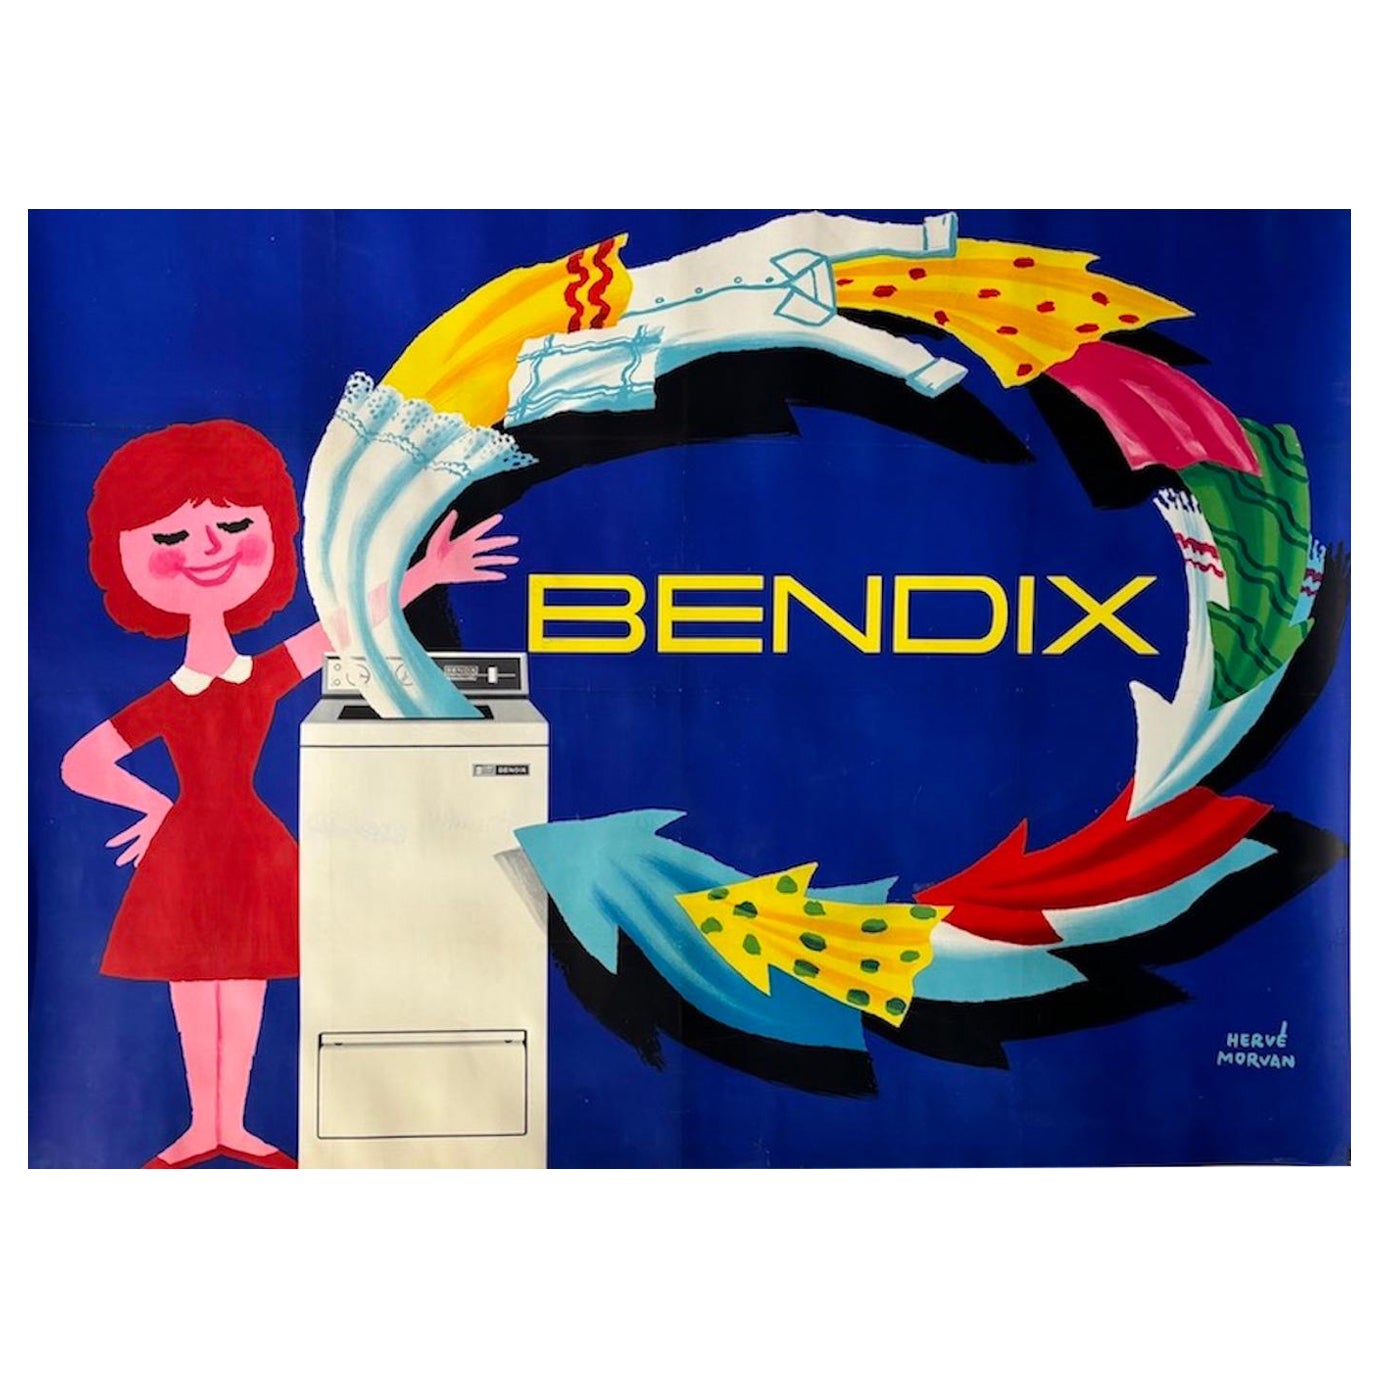 Mid-Century Original French Advertising Poster, 'BENDIX' by H. MORVAN, 1965 For Sale